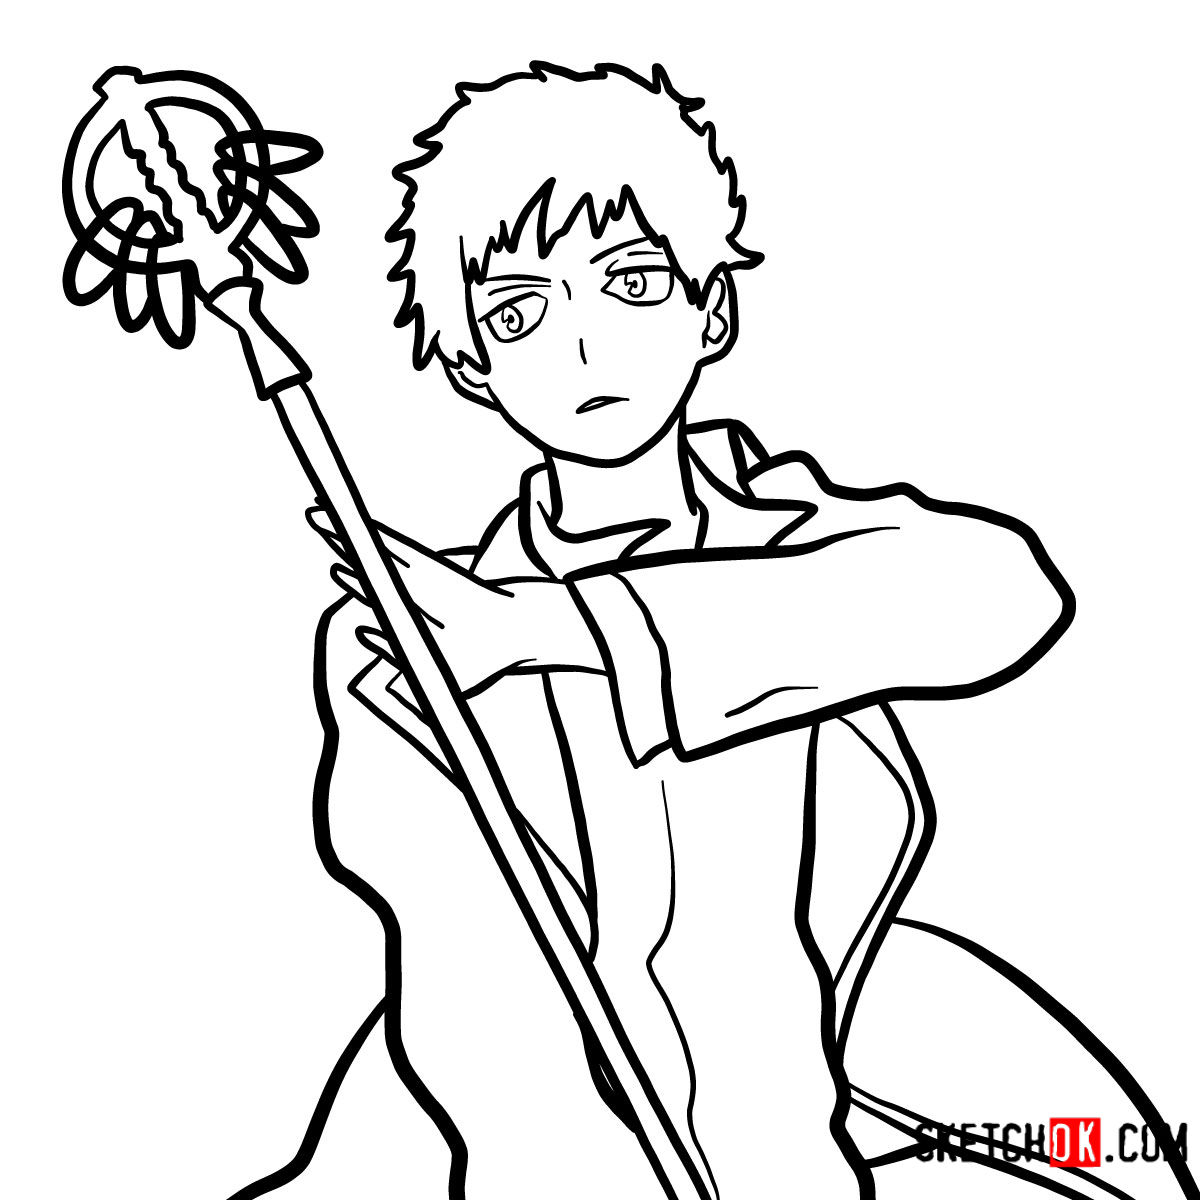 Blue Exorcist Coloring Pages.